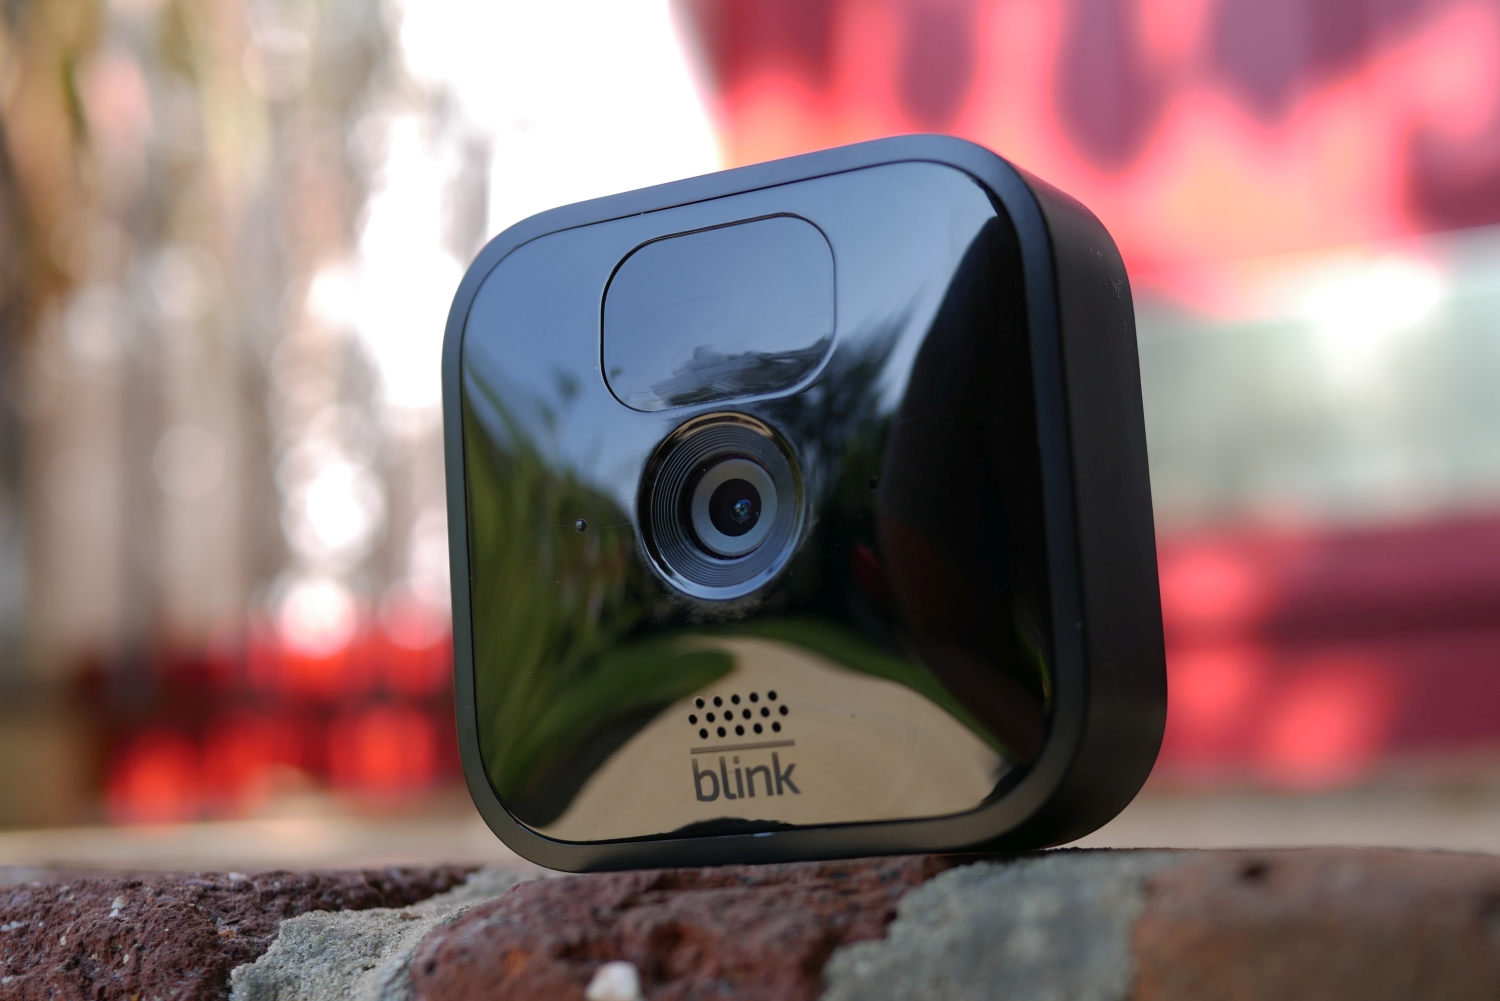  Can you use a Blink Outdoor Camera without a subscription?